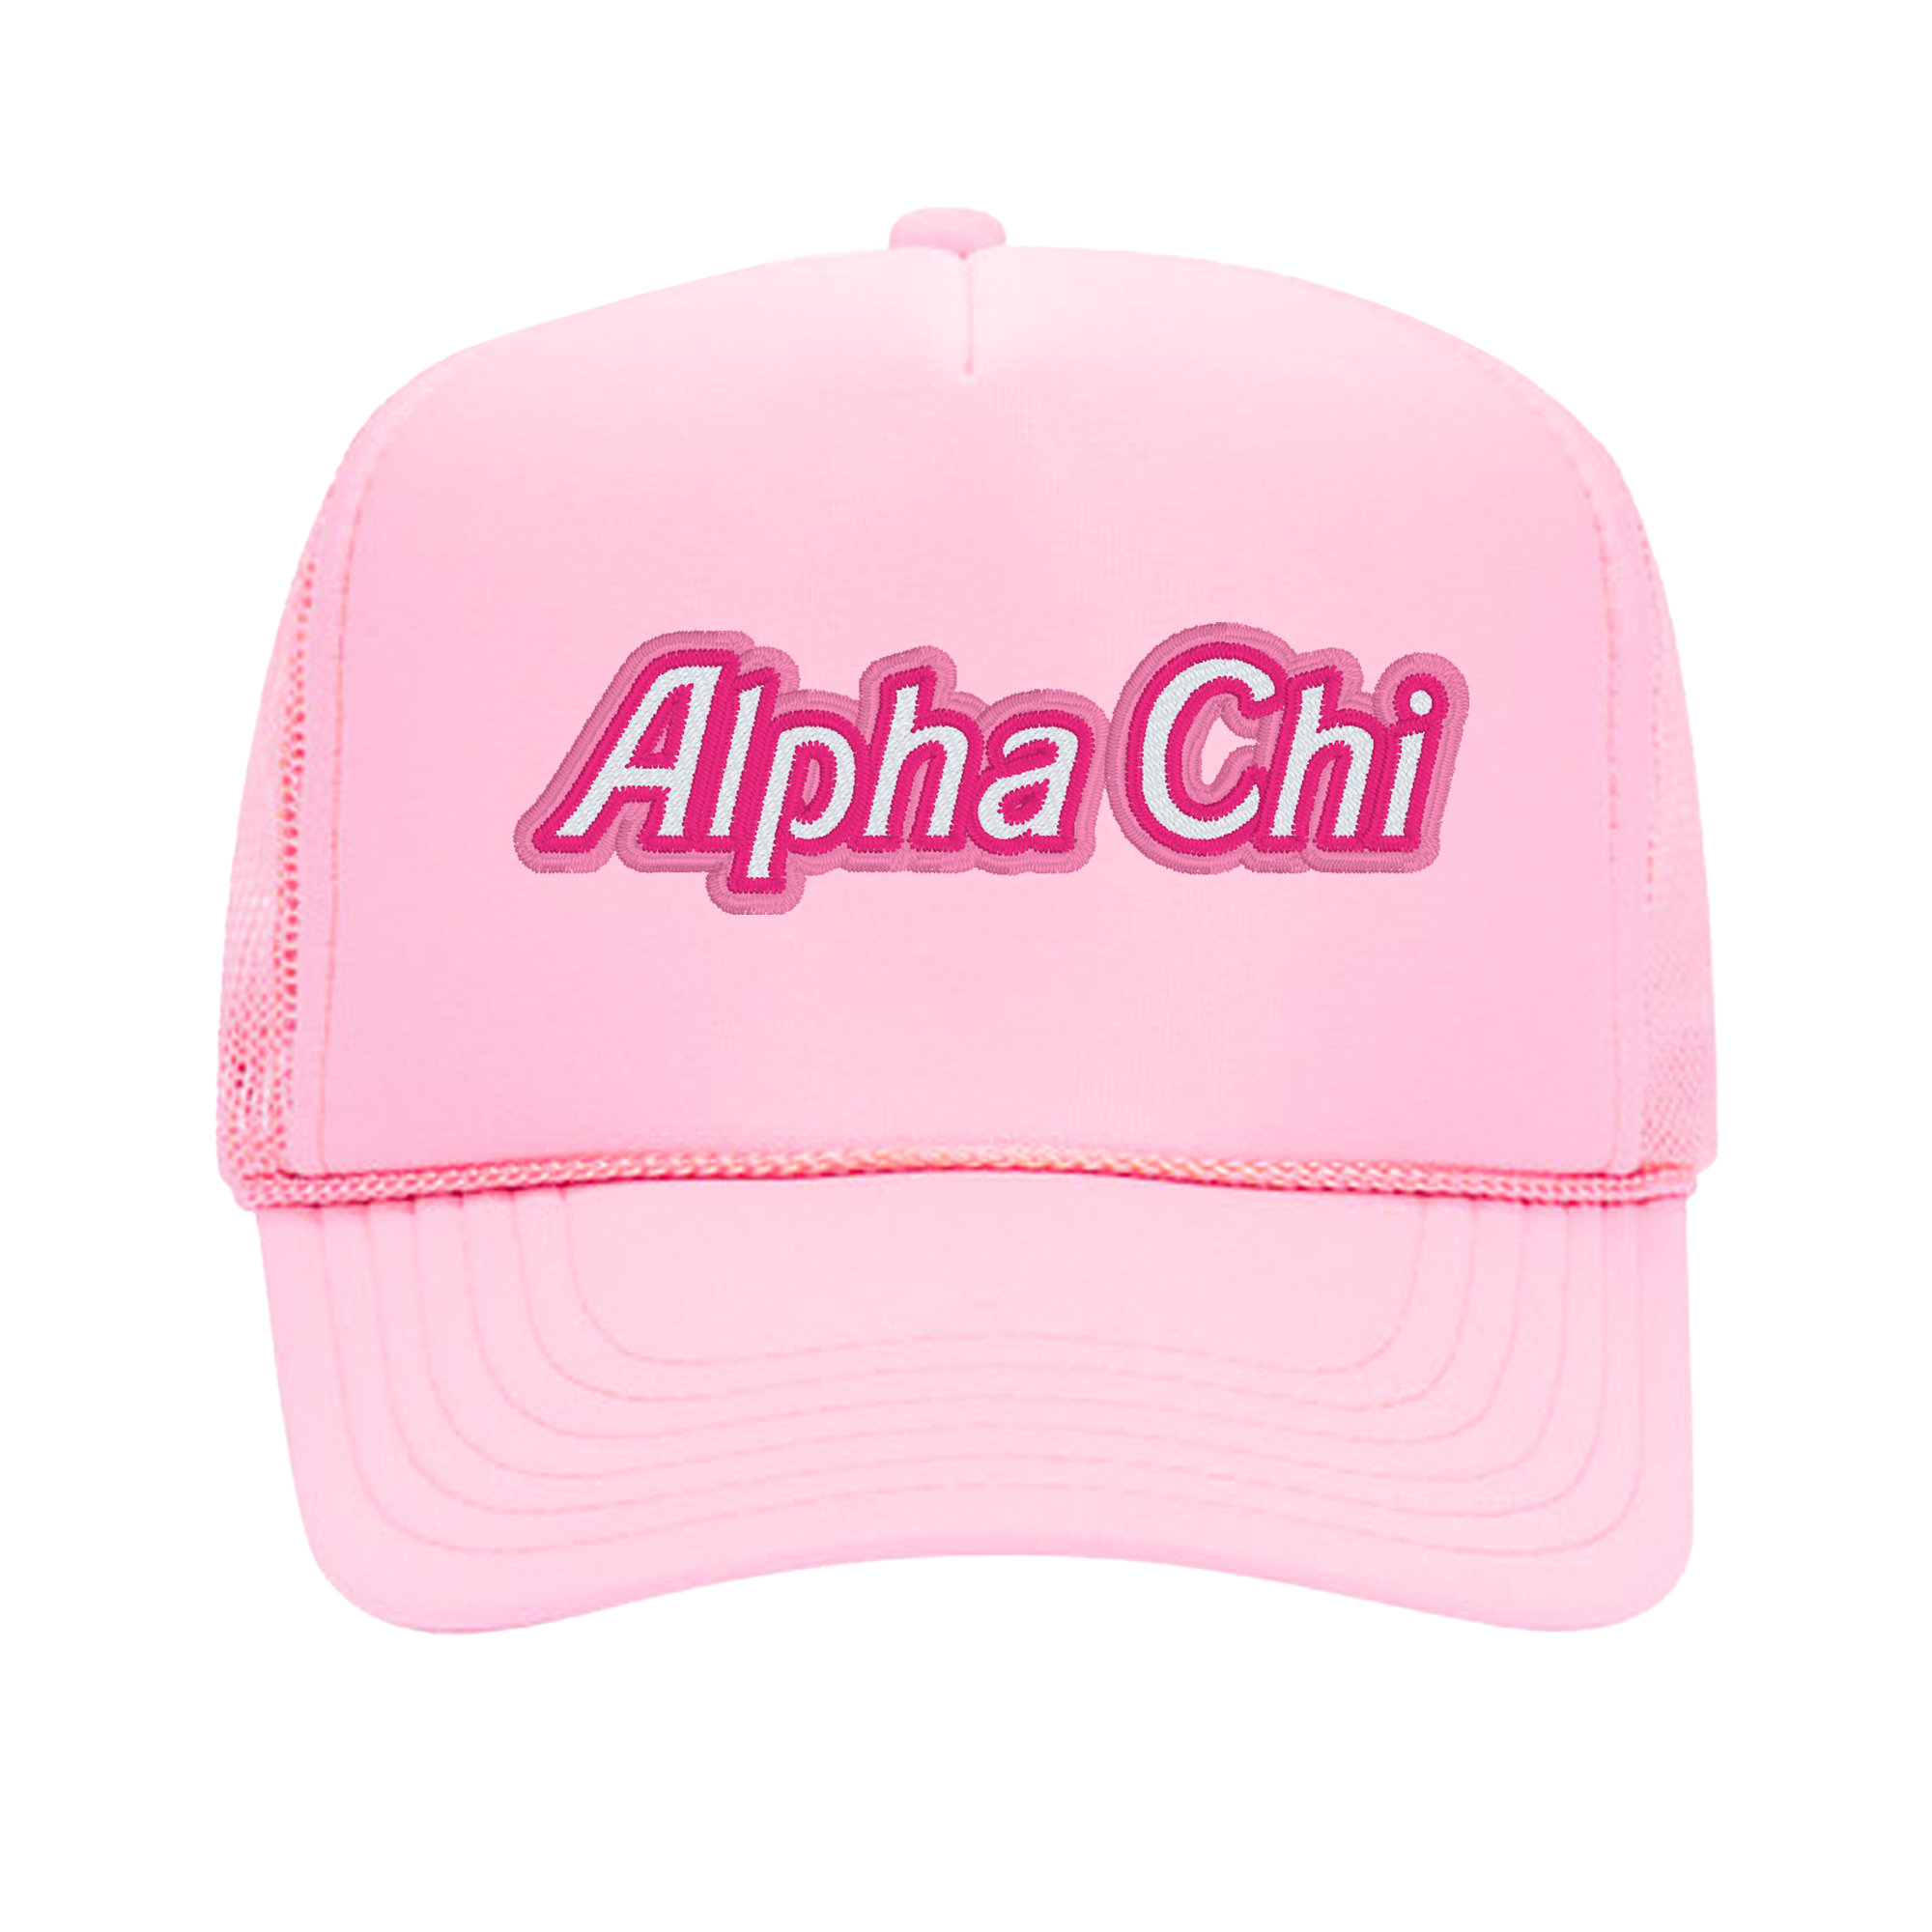 a pink trucker hat with the word alpha chi on it